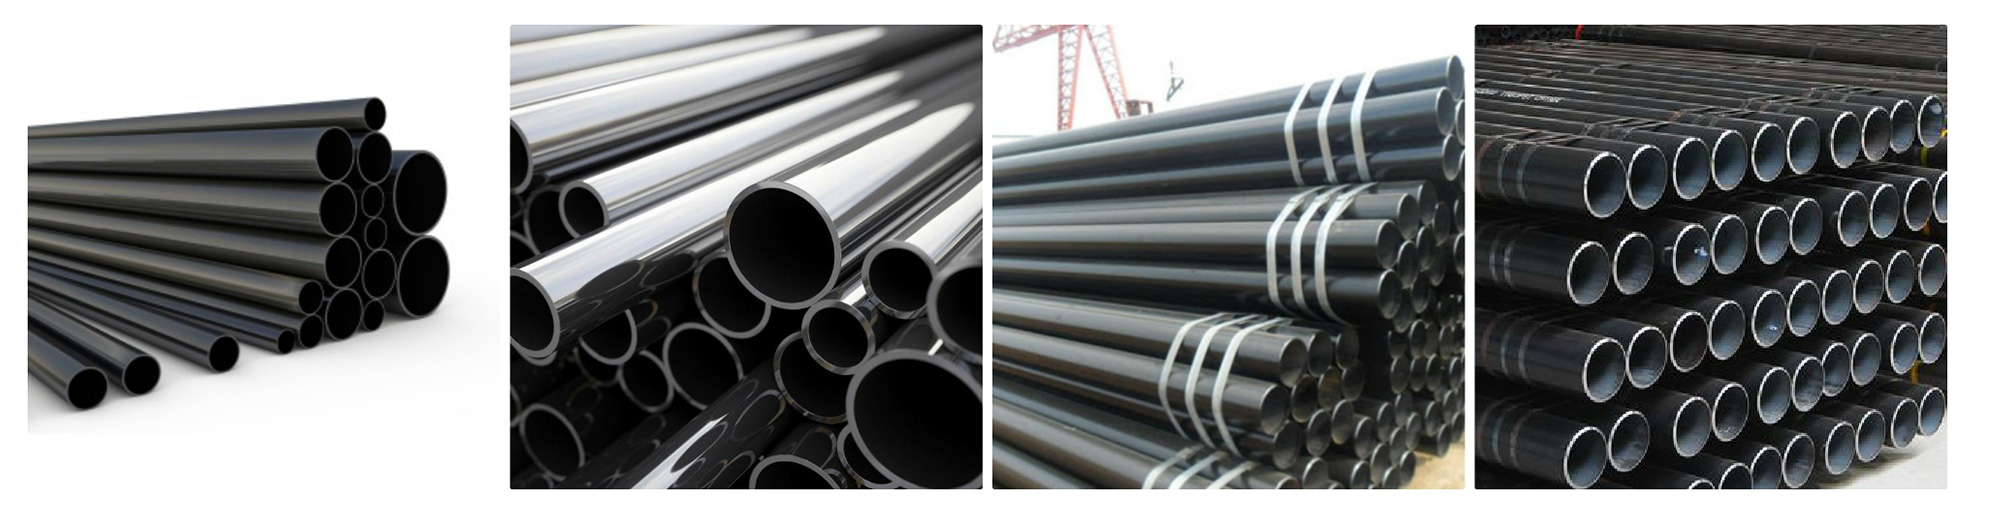 Carbon steel & Stainless steel pipes